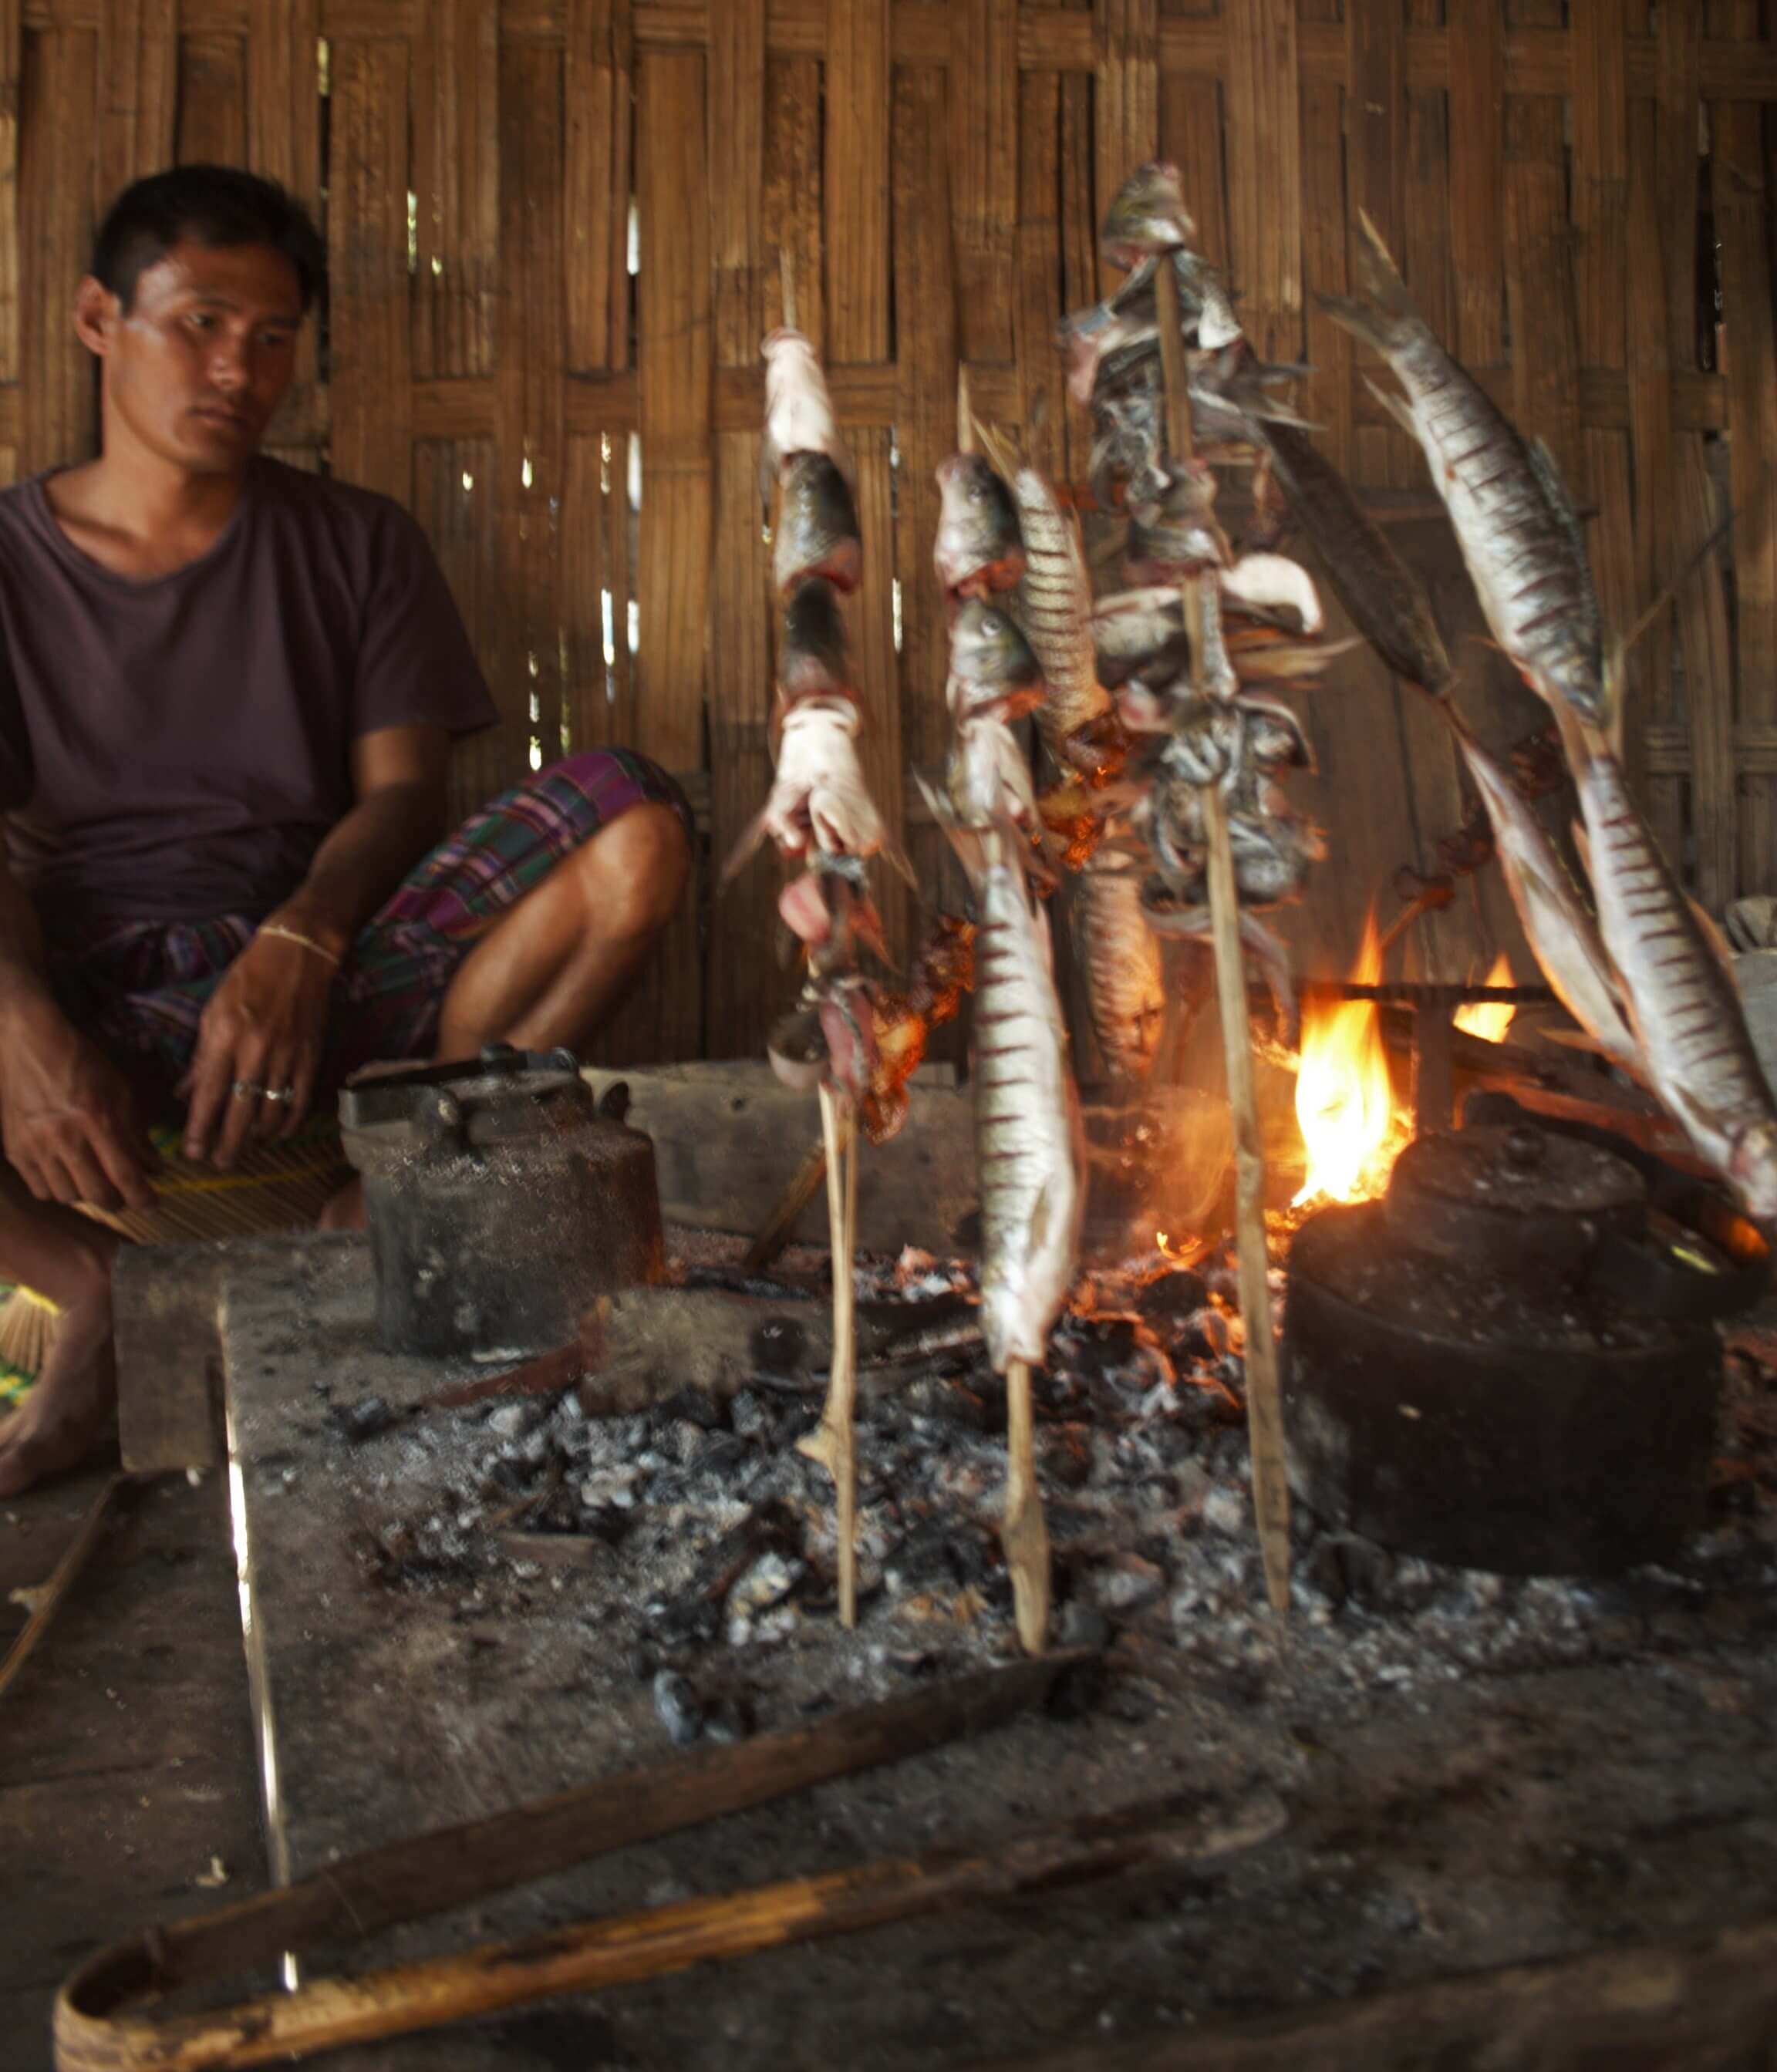 A local man preparing fish by the fire